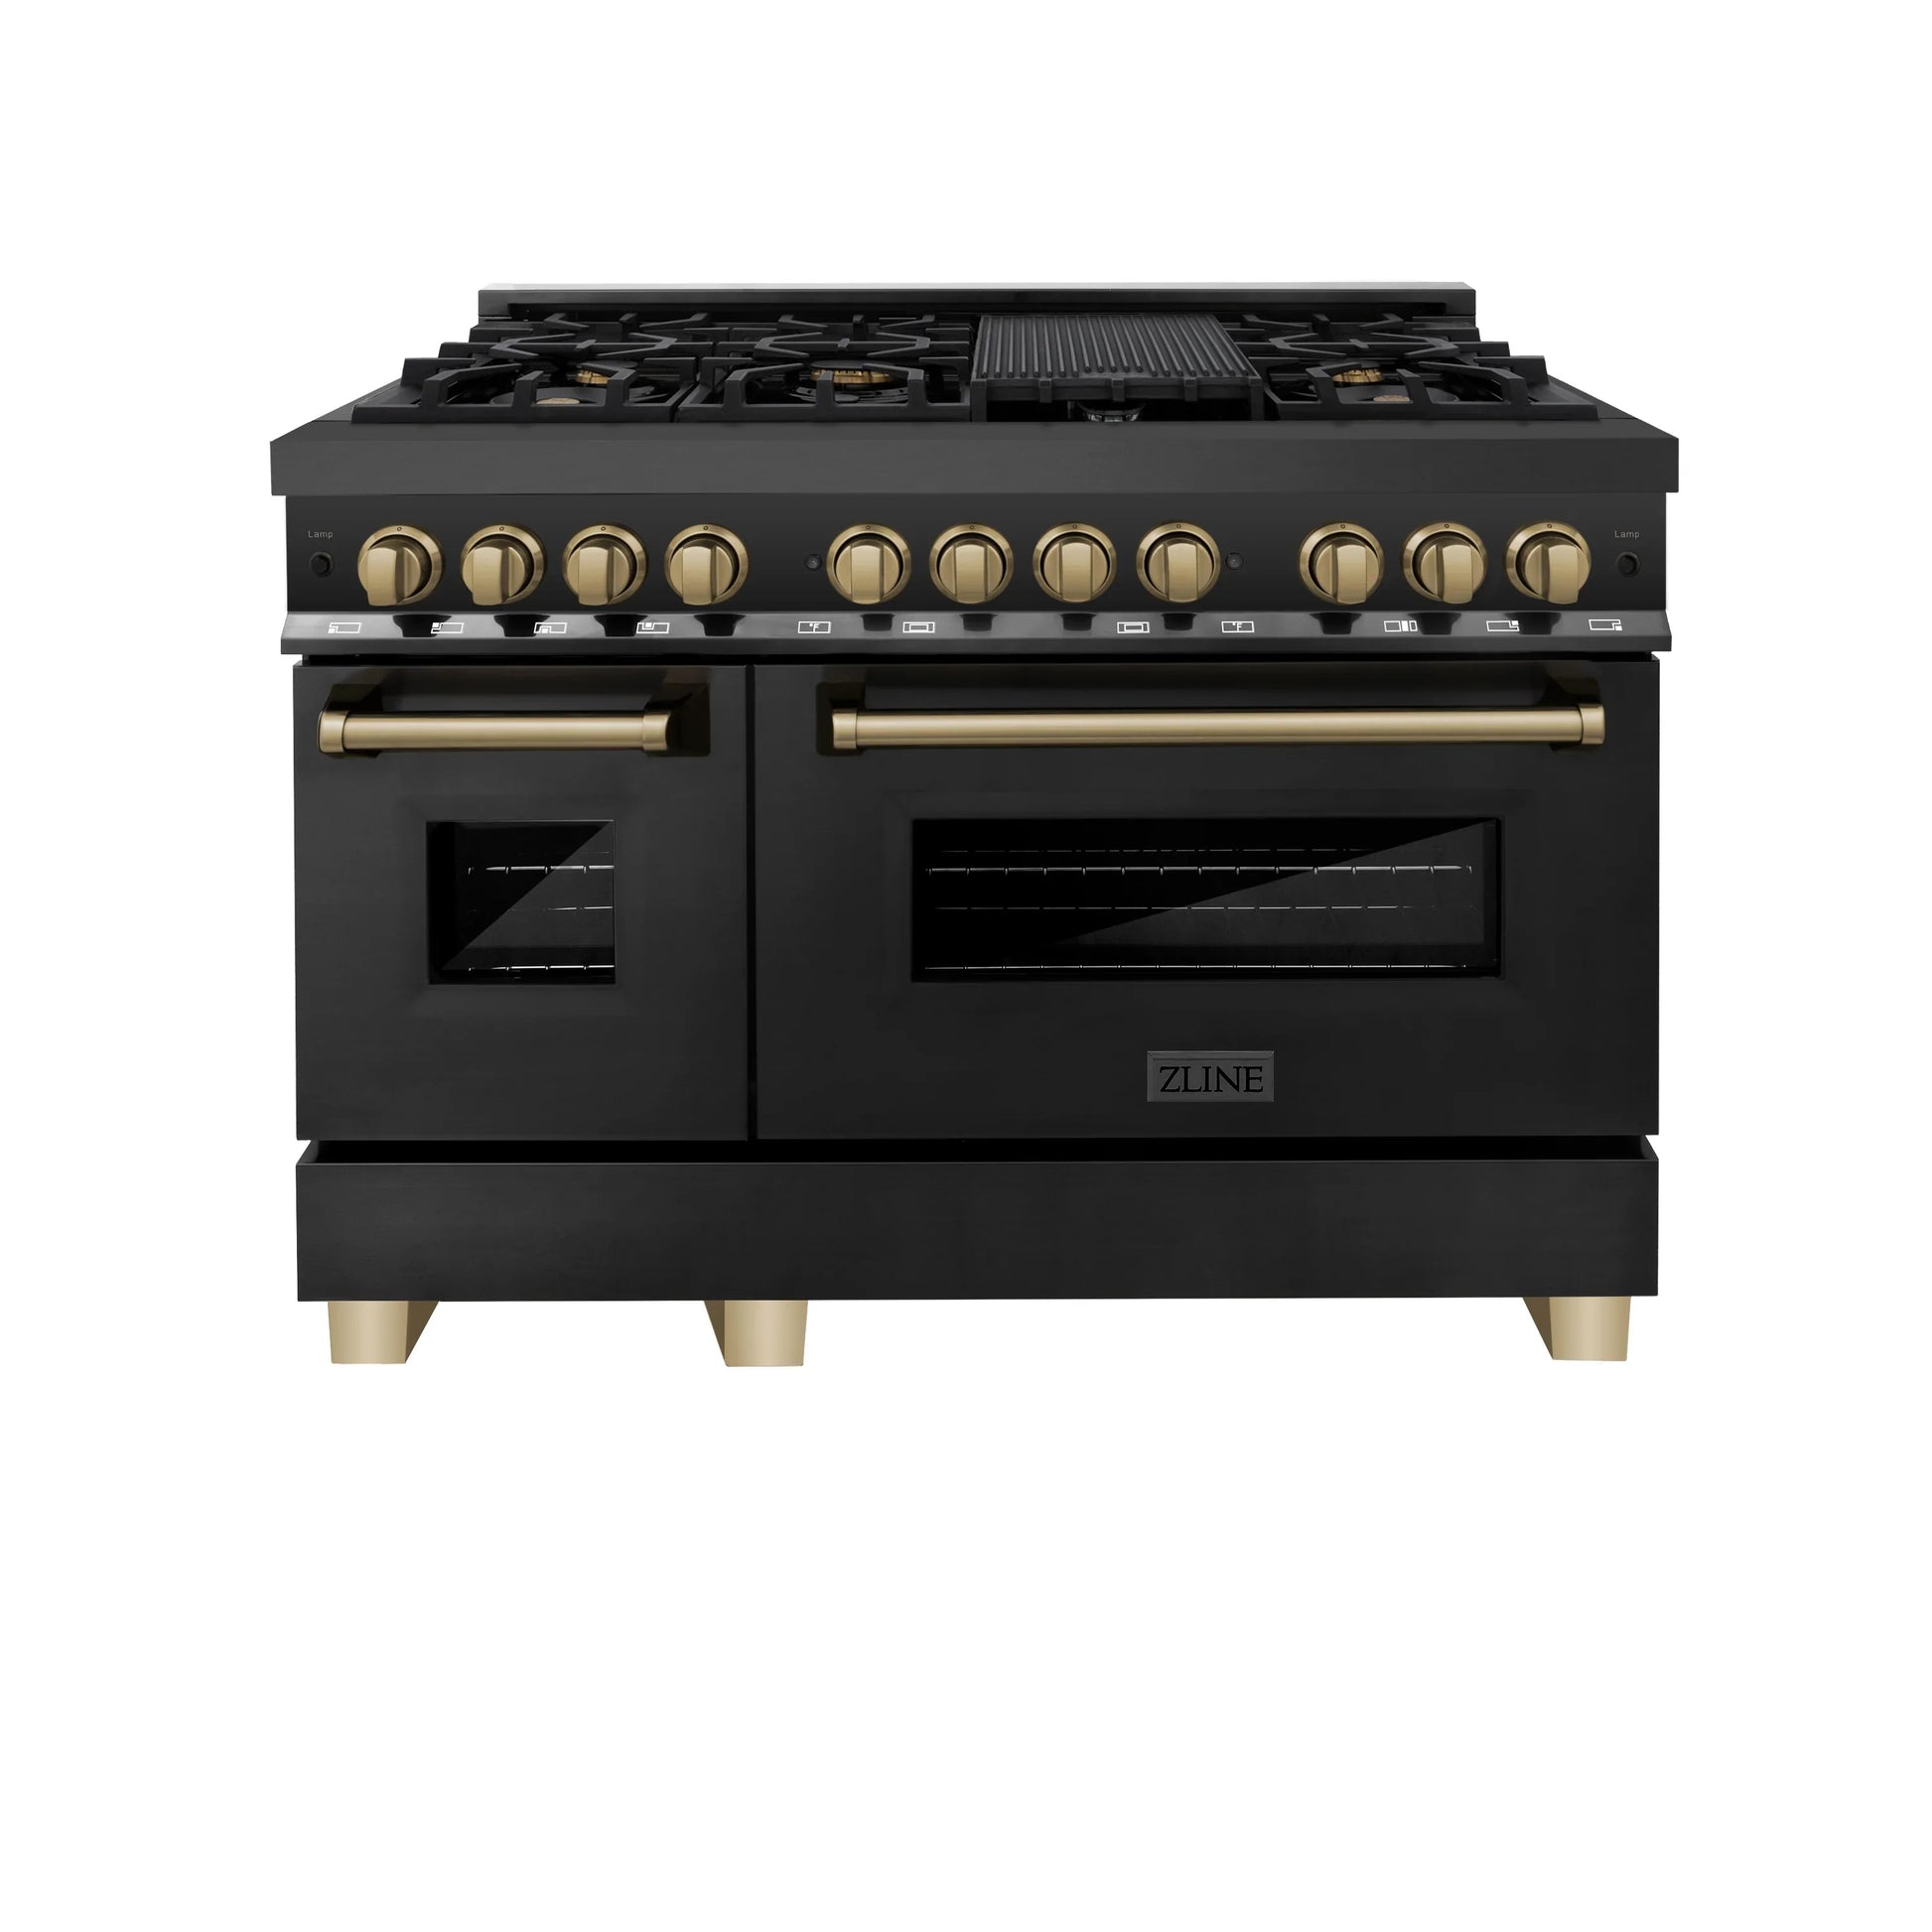 ZLINE Autograph Edition 48" Dual Fuel Range with Gas Stove and Electric Oven - Black Stainless Steel, Champagne Bronze Accents